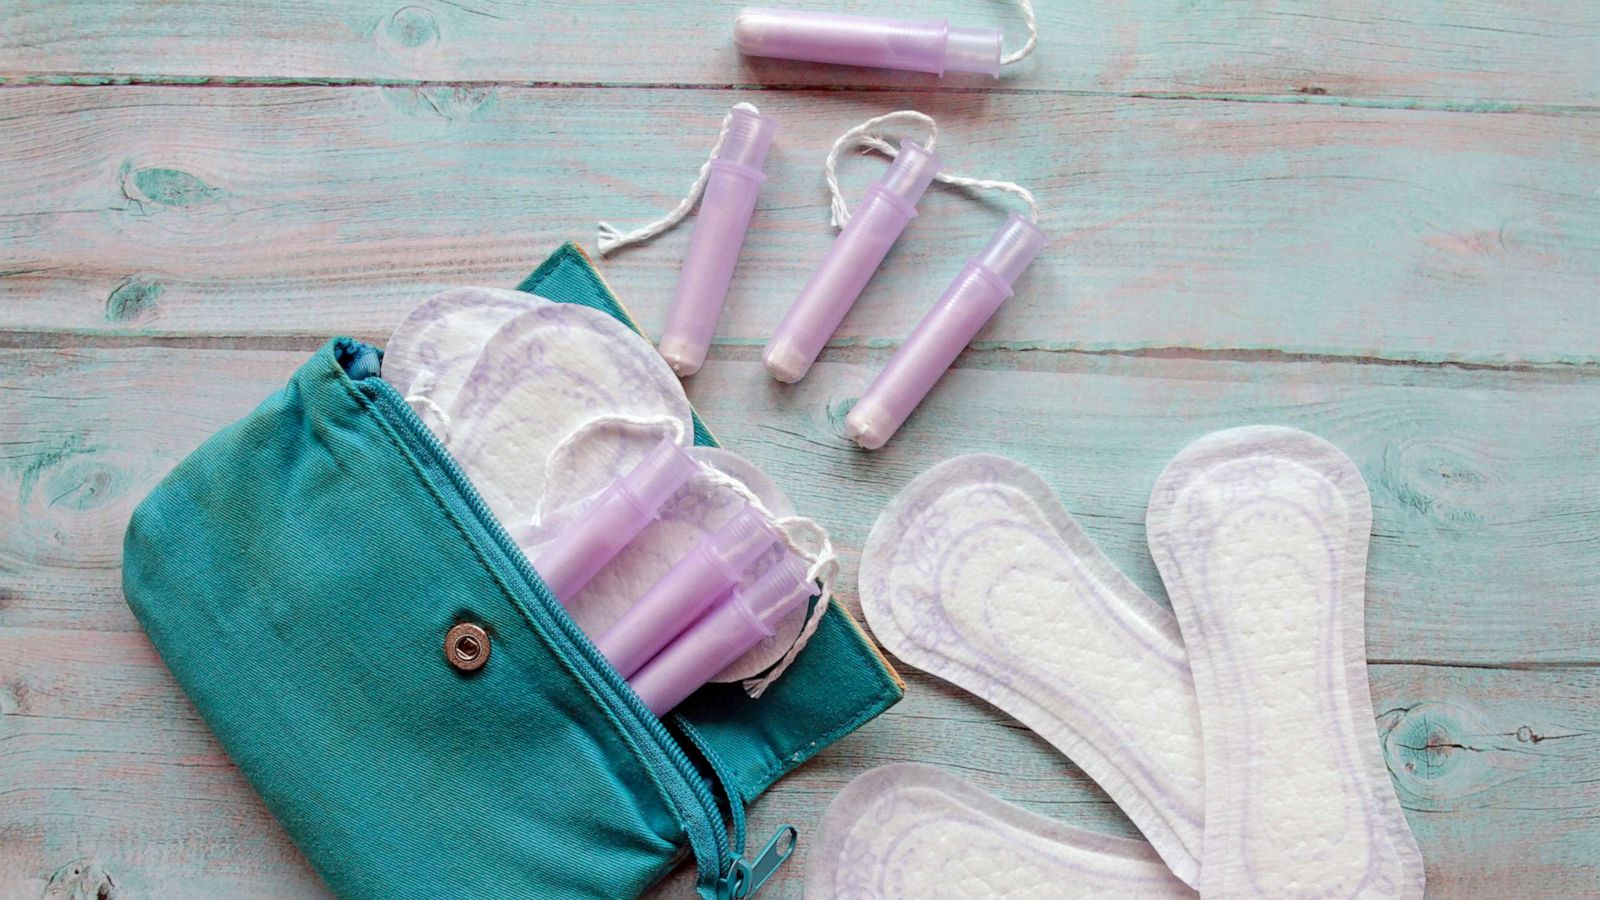 Our menstrual products, sustainable reusable menstrual period